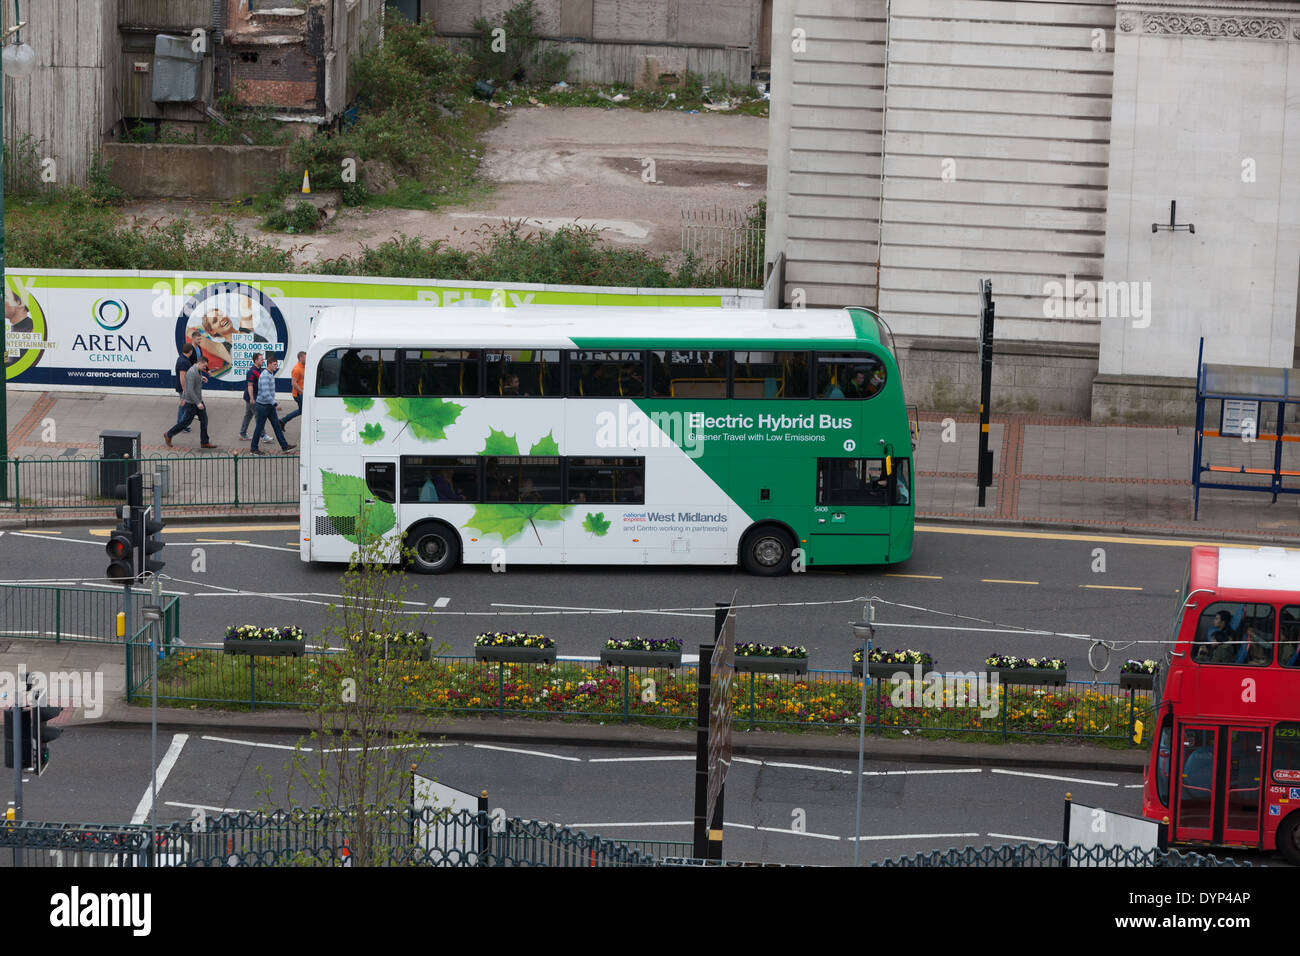 Electric hybrid doubledecker bus in service in Birmingham city center. Helping to reduce emissions and pollution. Stock Photo